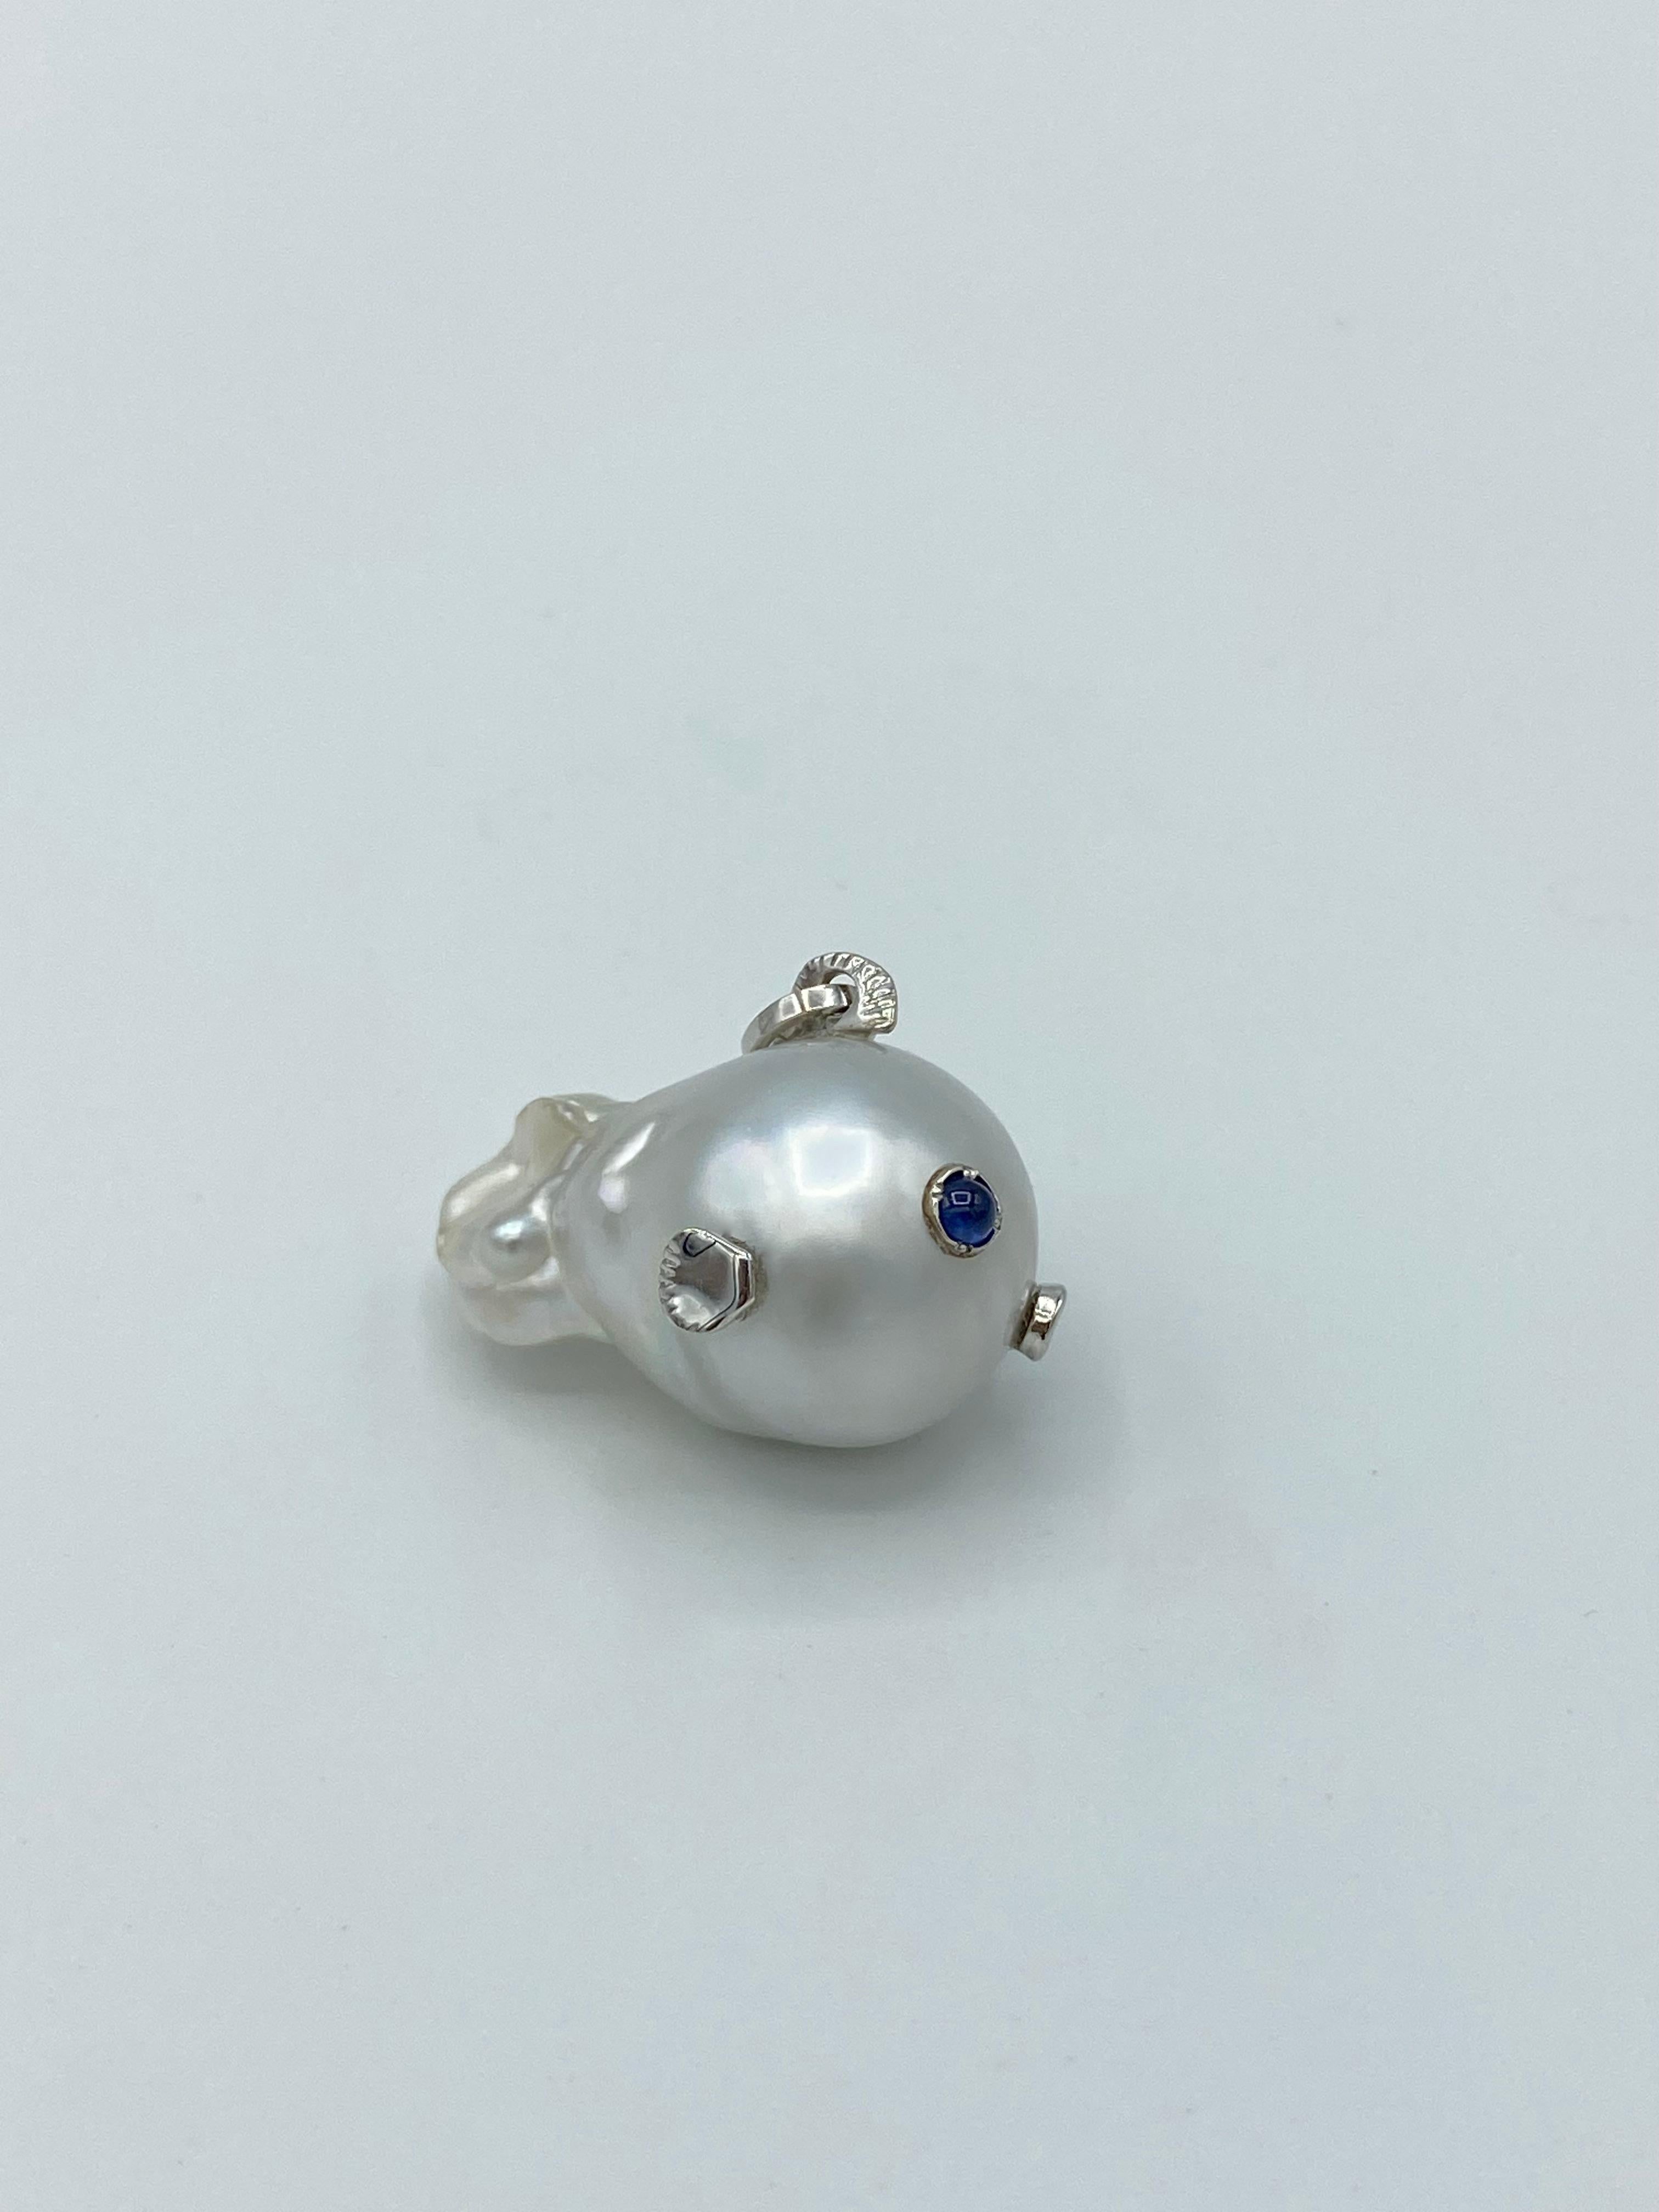 Cabochon Fish Blue Sapphire 18Kt Gold Australian Pearl Pendant/Necklace Made in Italy